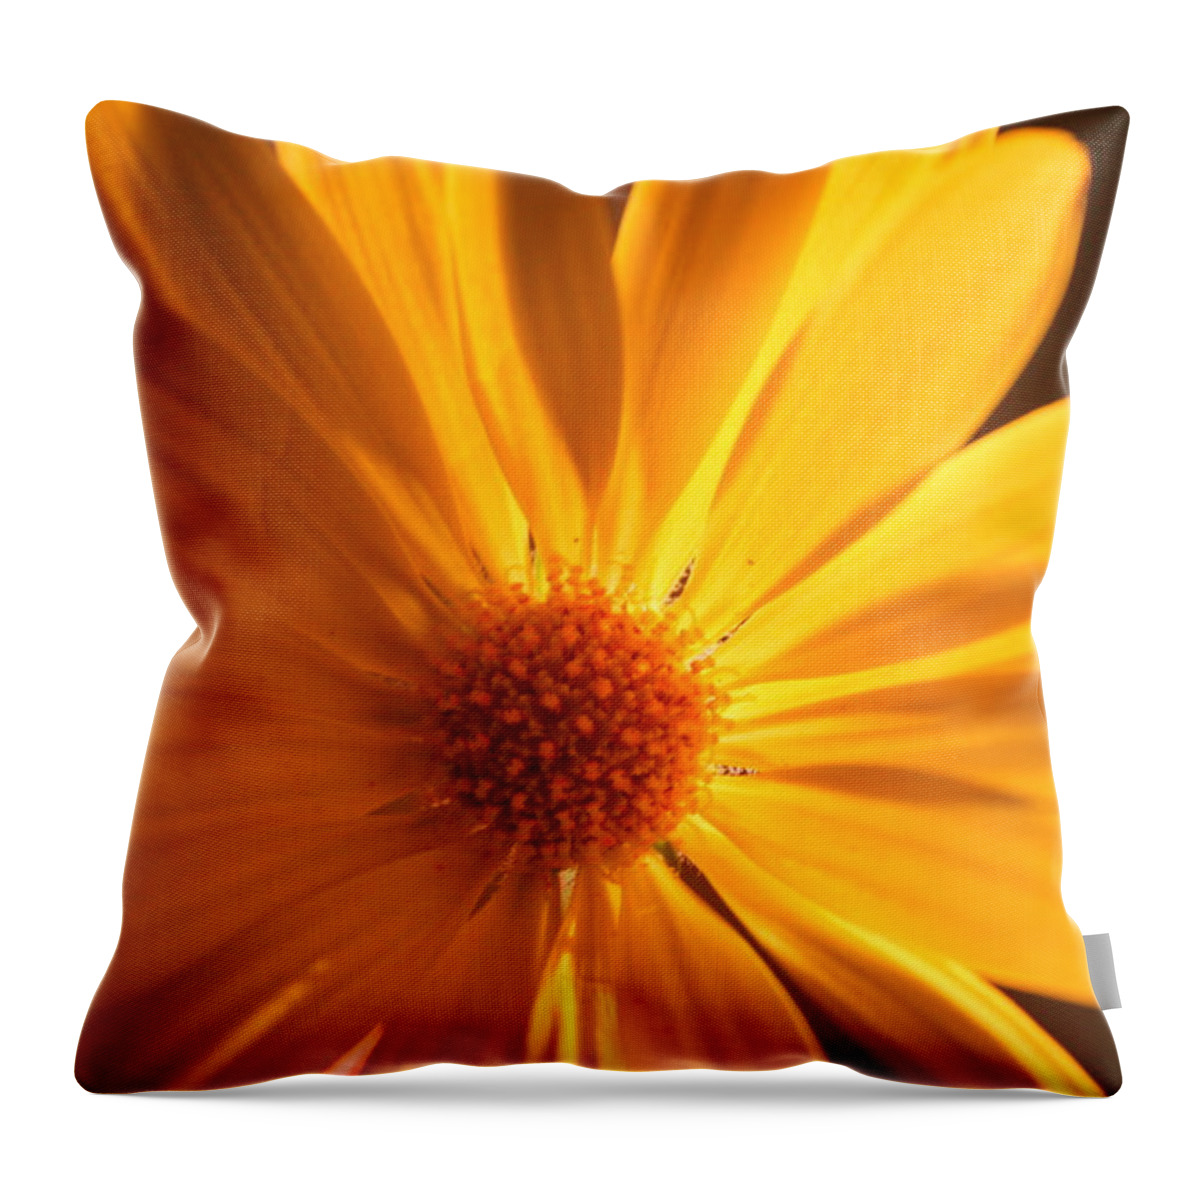 Flower Throw Pillow featuring the photograph Sweet One by Julie Lueders 